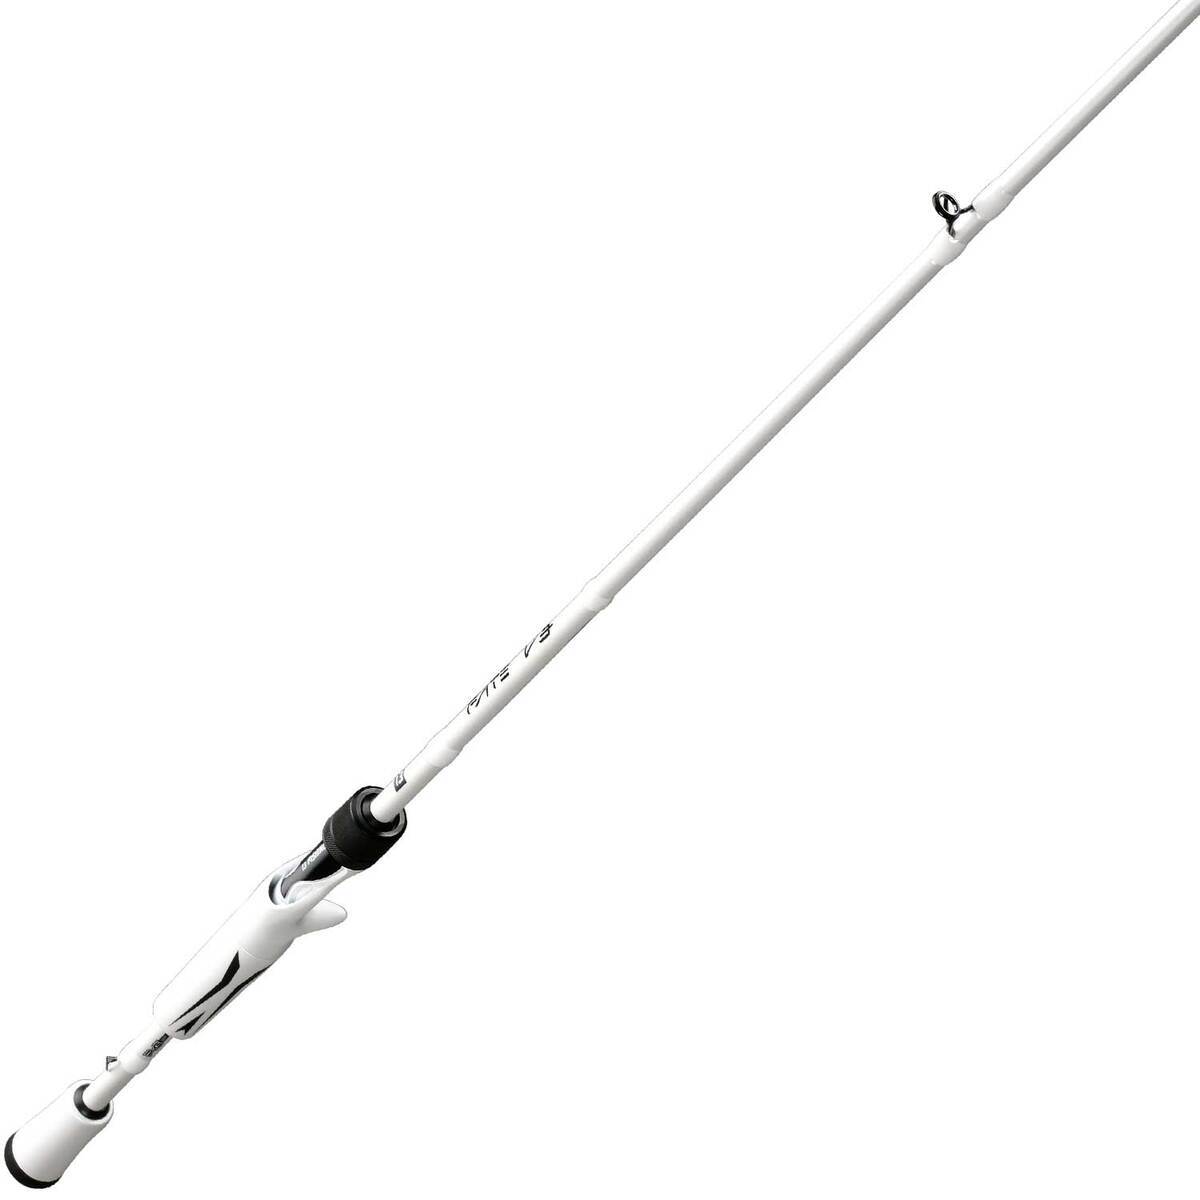 13 Fishing Fate V3 7 ft. 1in. M Casting Rod